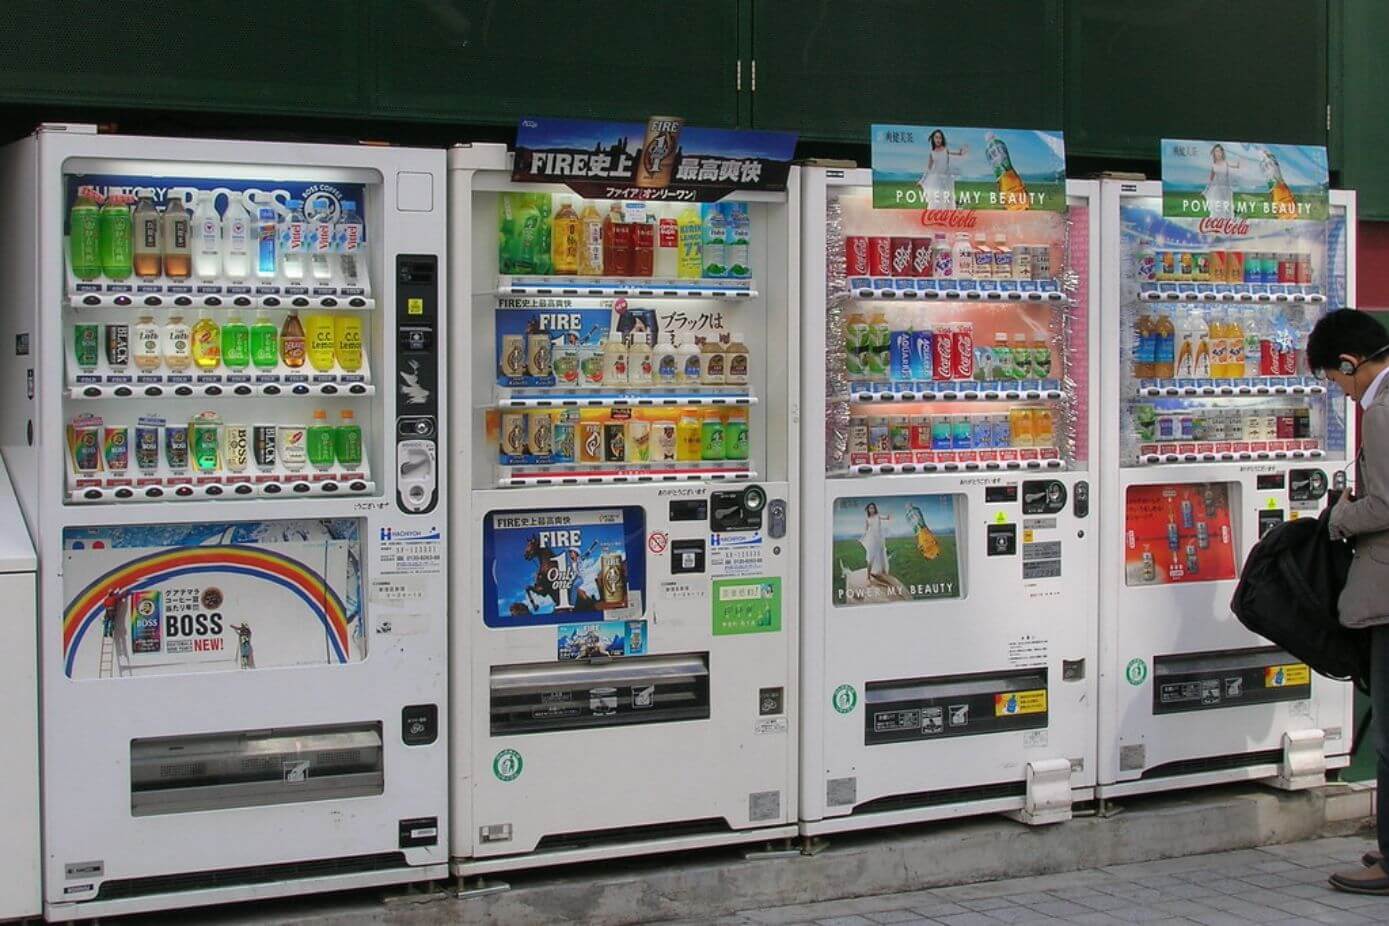 10 things NOT to do in Japan - Vending machines